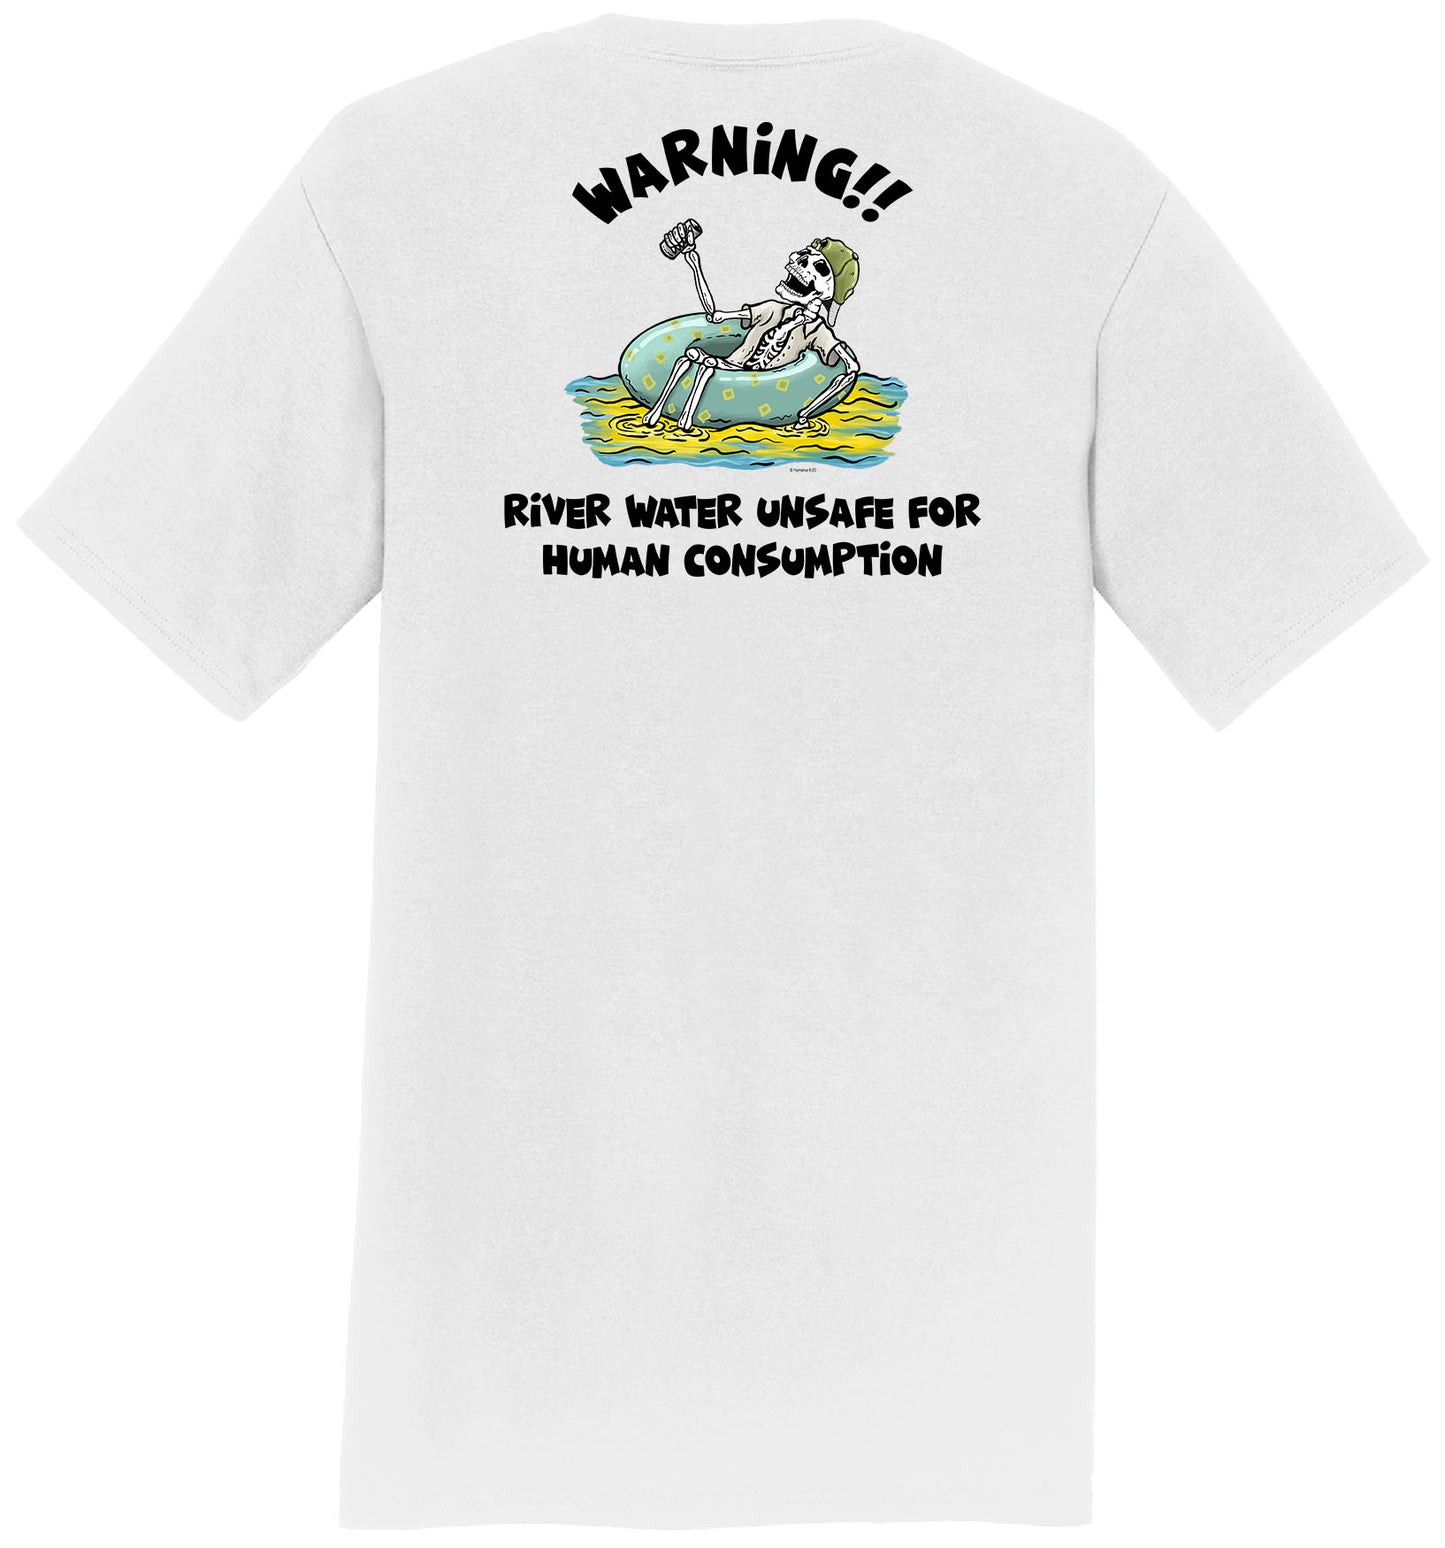 River Water Not Fit For Human Consumption - Men's Short Sleeve T-Shirt